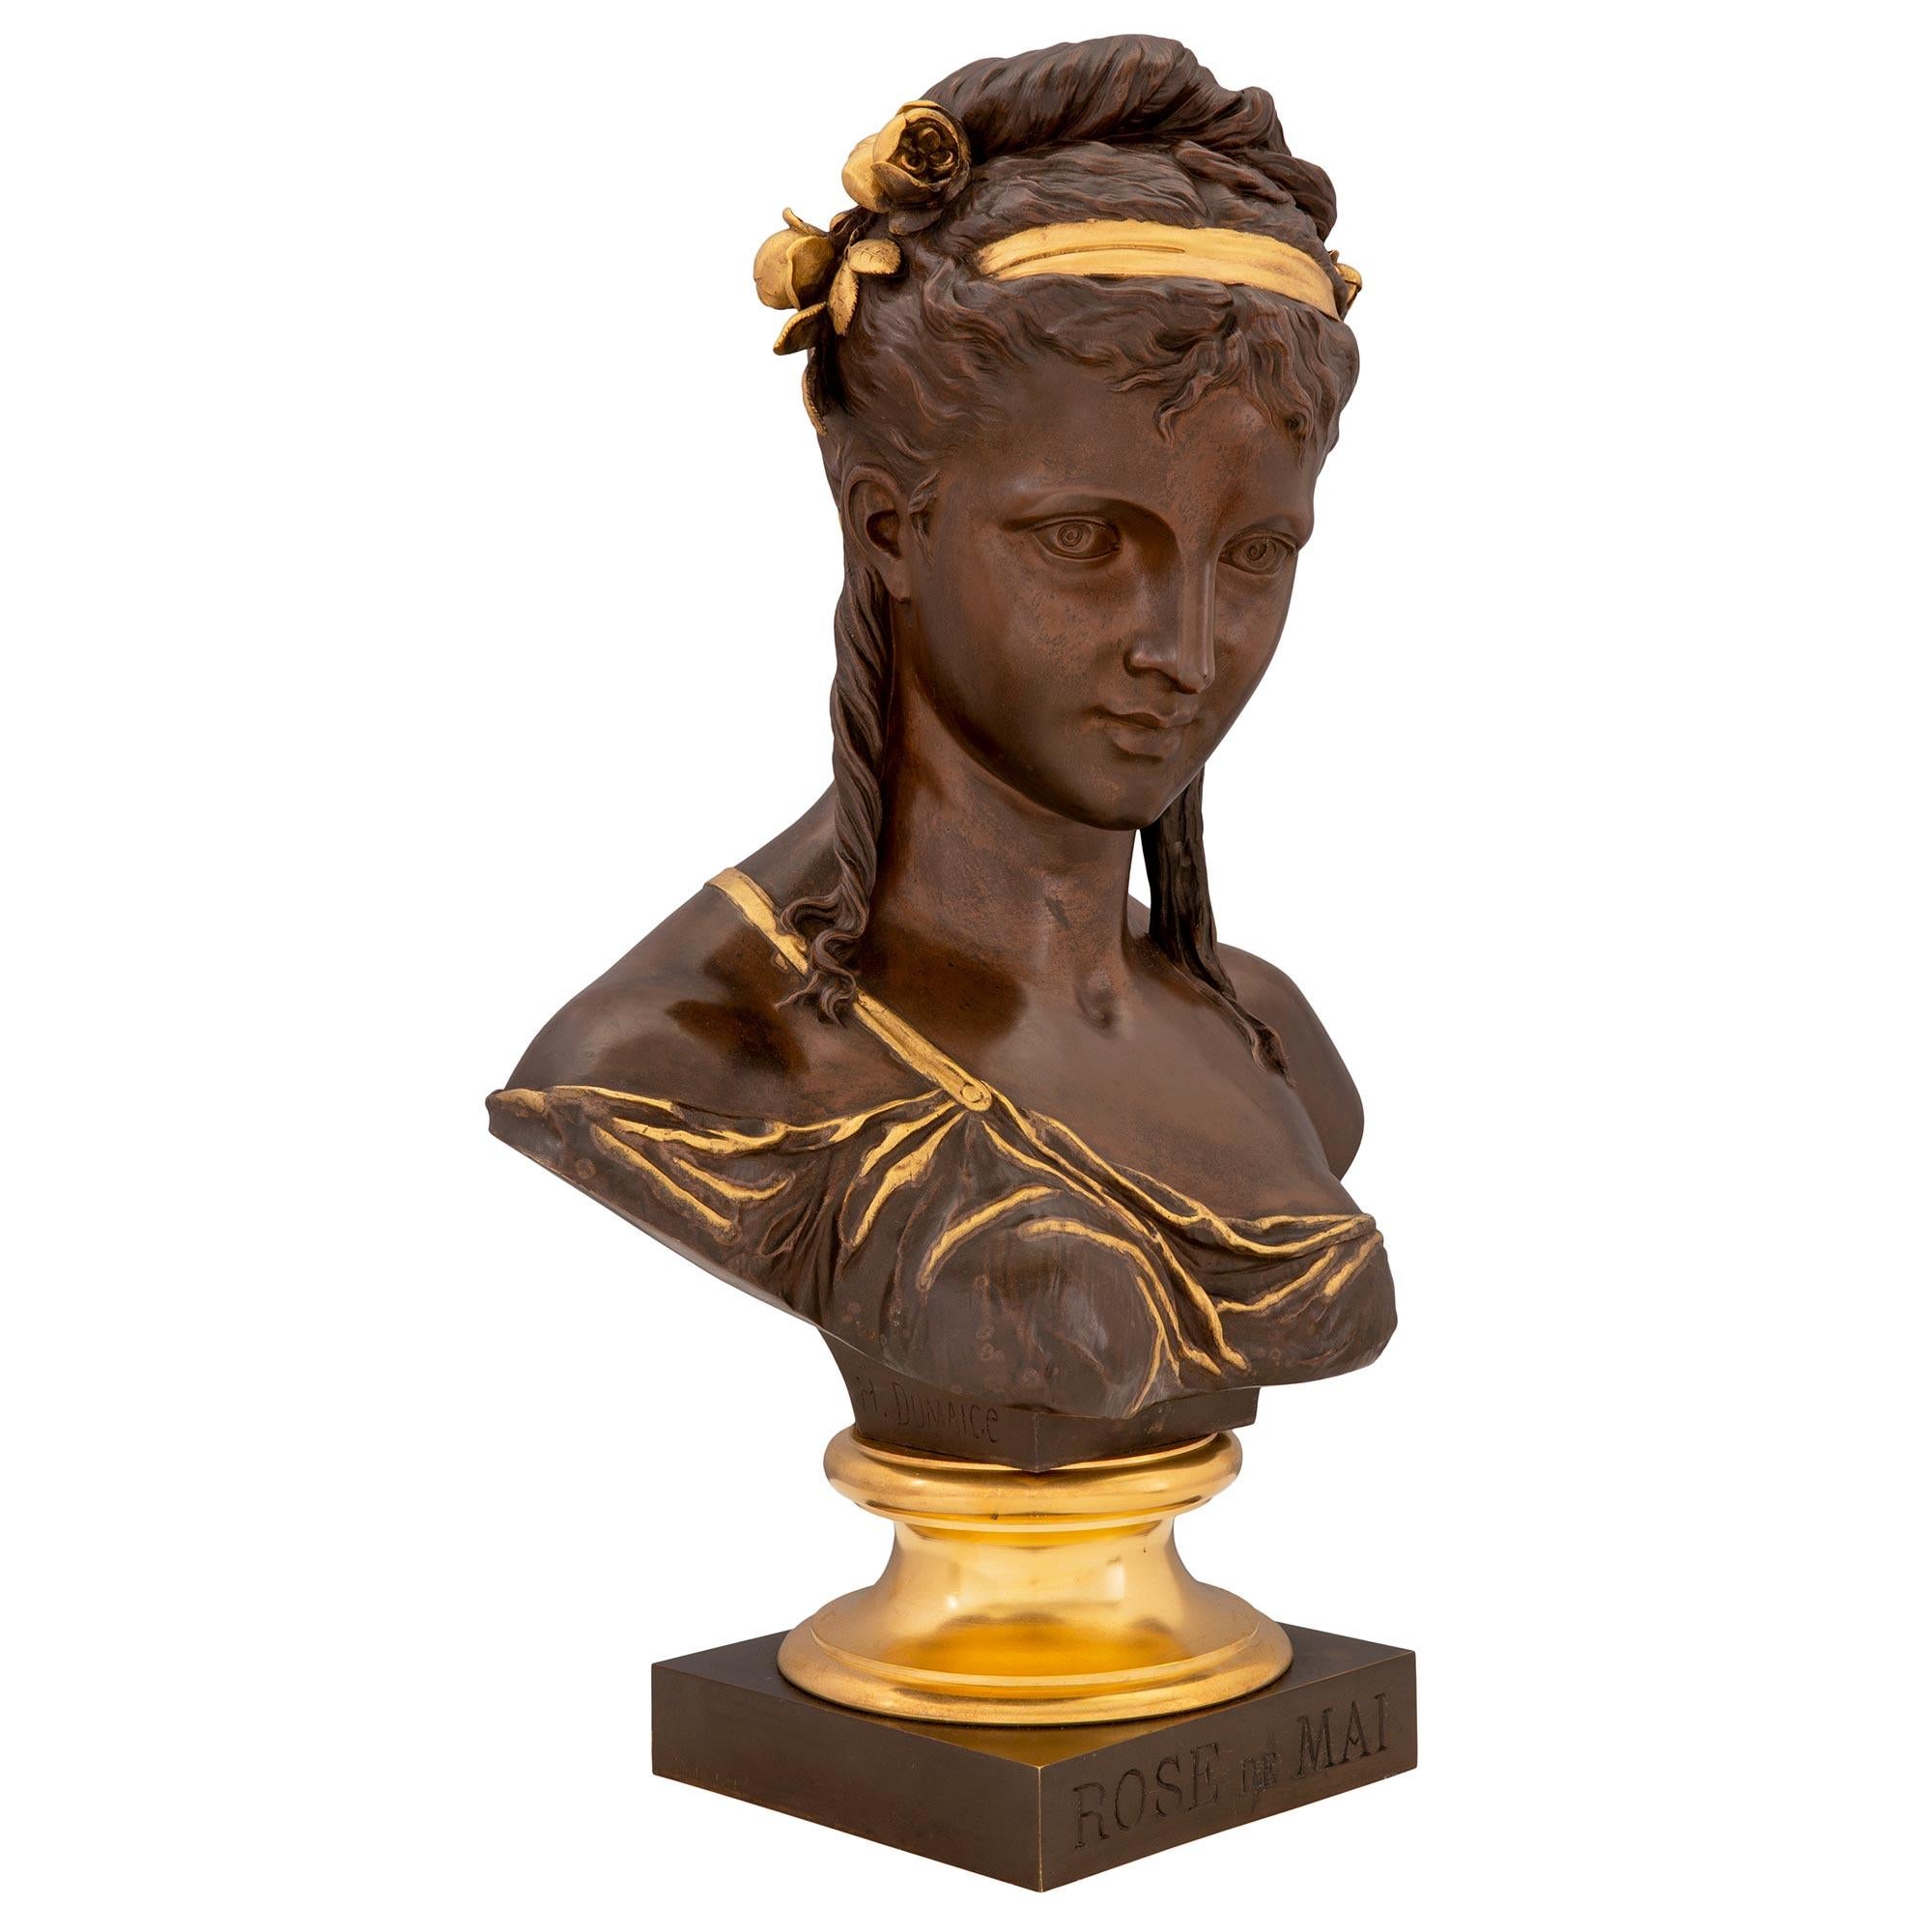 A stunning French 19th century Louis XVI st. patinated bronze and ormolu bust, signed H. DUMAICE. The bust is raised by a square patinated bronze base with the inscription ROSE de MAI with a mottled ormolu socle pedestal. The richly chased bust